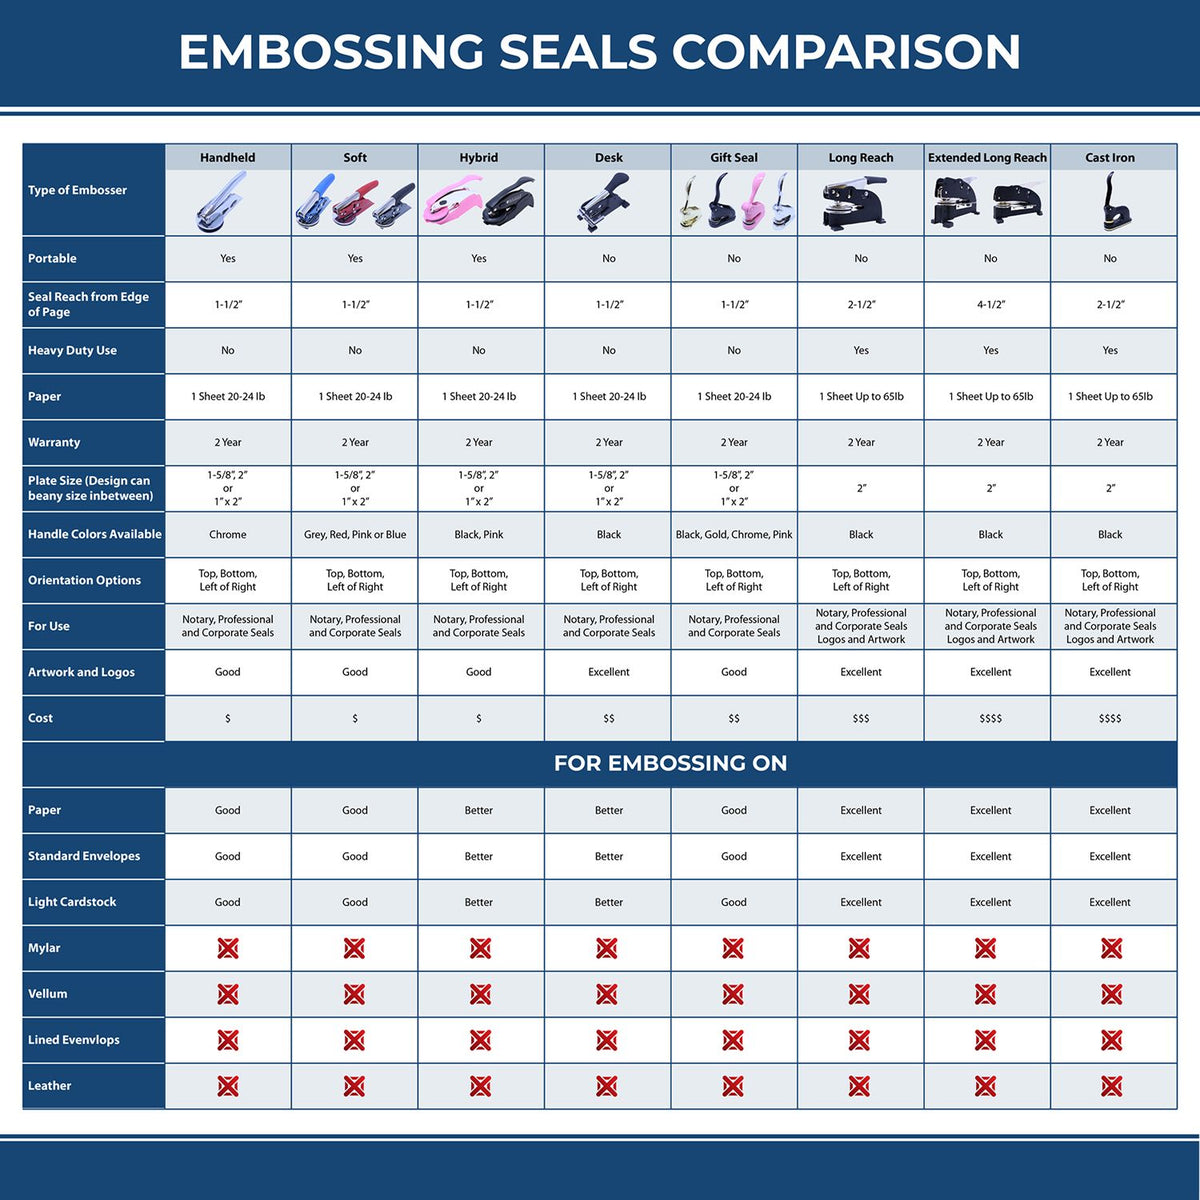 A comparison chart for the different types of mount models available for the Gift Wyoming Land Surveyor Seal